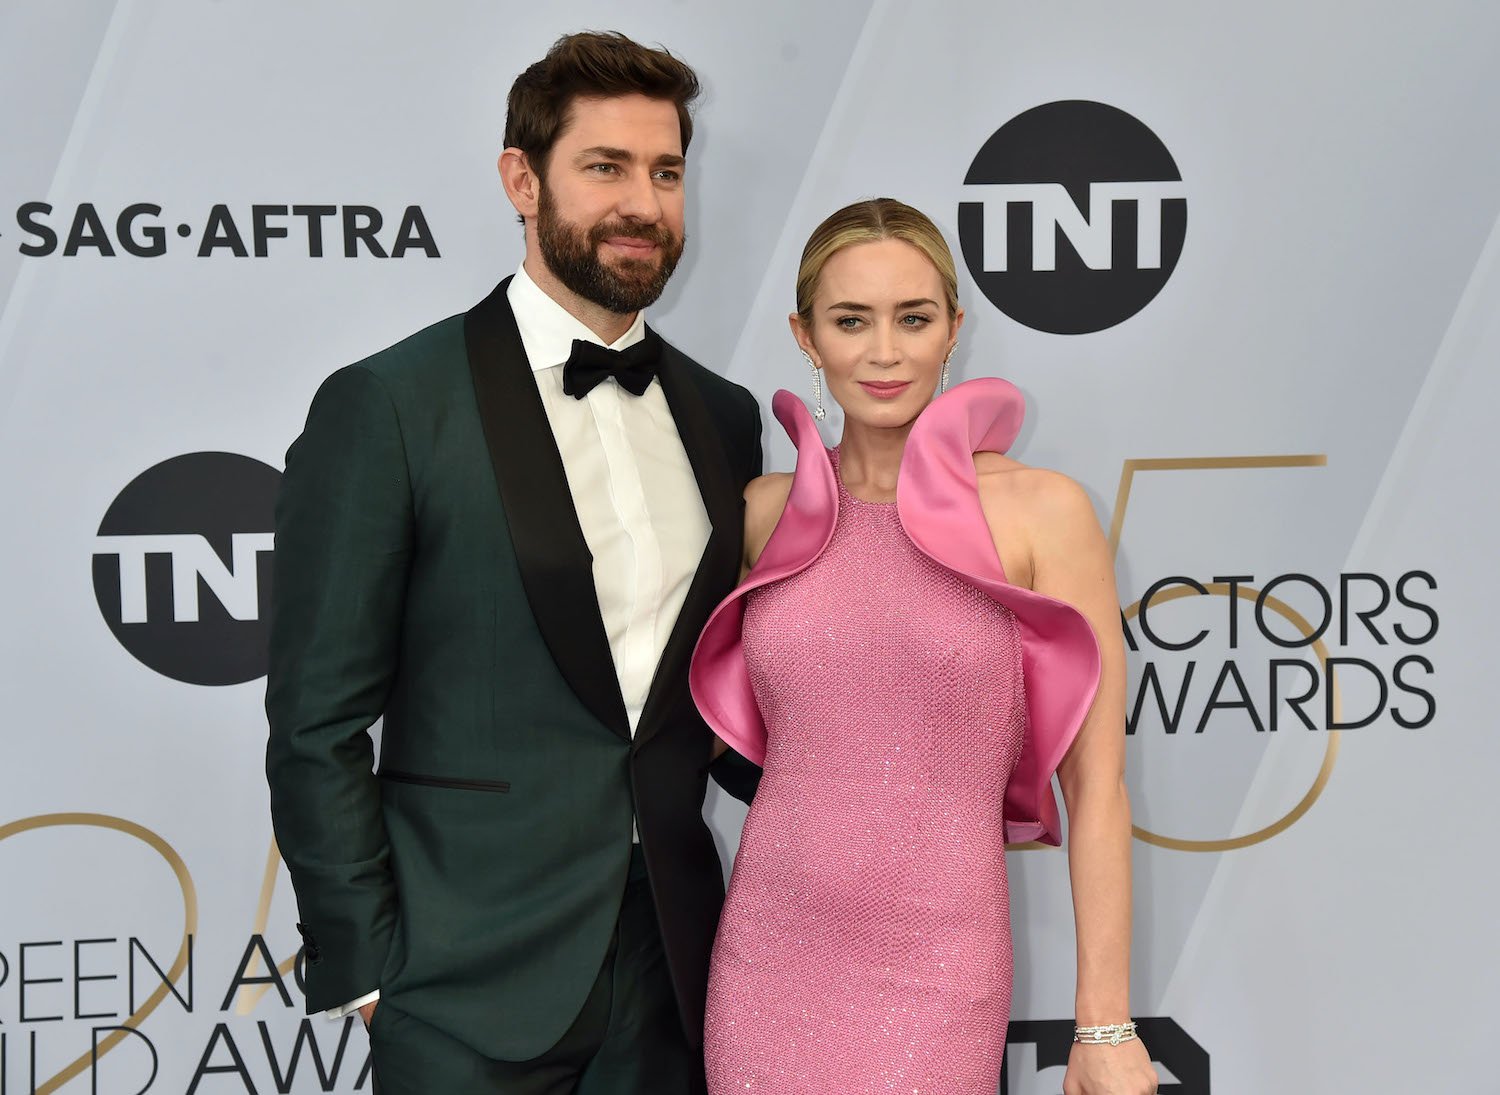 John Krasinski wears a tuxedo and Emily Blunt wears a pink dress with ruffle accents at the 2019 Screen Actors Guild Awards red carpet